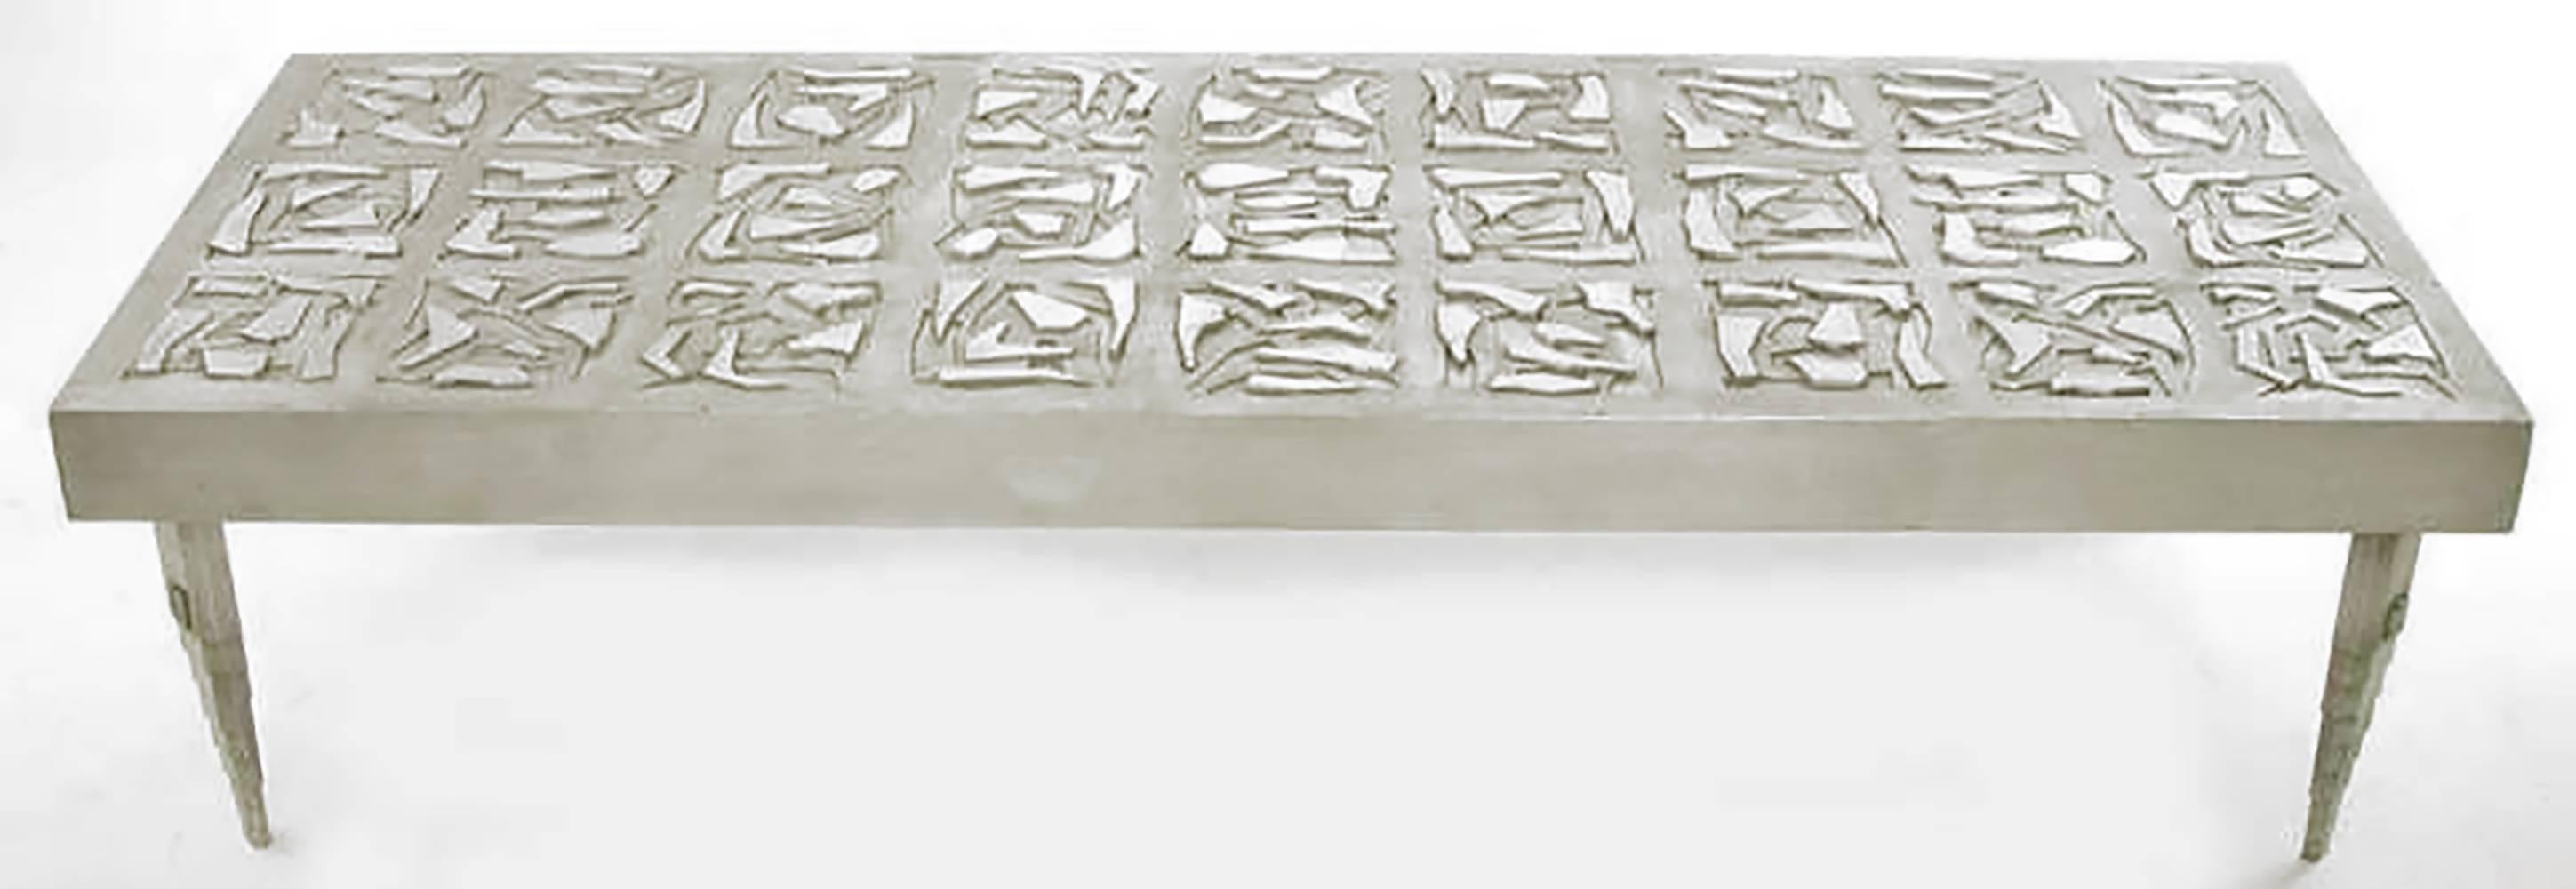 Custom aluminium studio coffee table that measures over six feet in length. Top composed of 27 square relief sections that are thematically similar, but are each unique. Four canted aluminum legs are inverse ziggurat form, with artist's